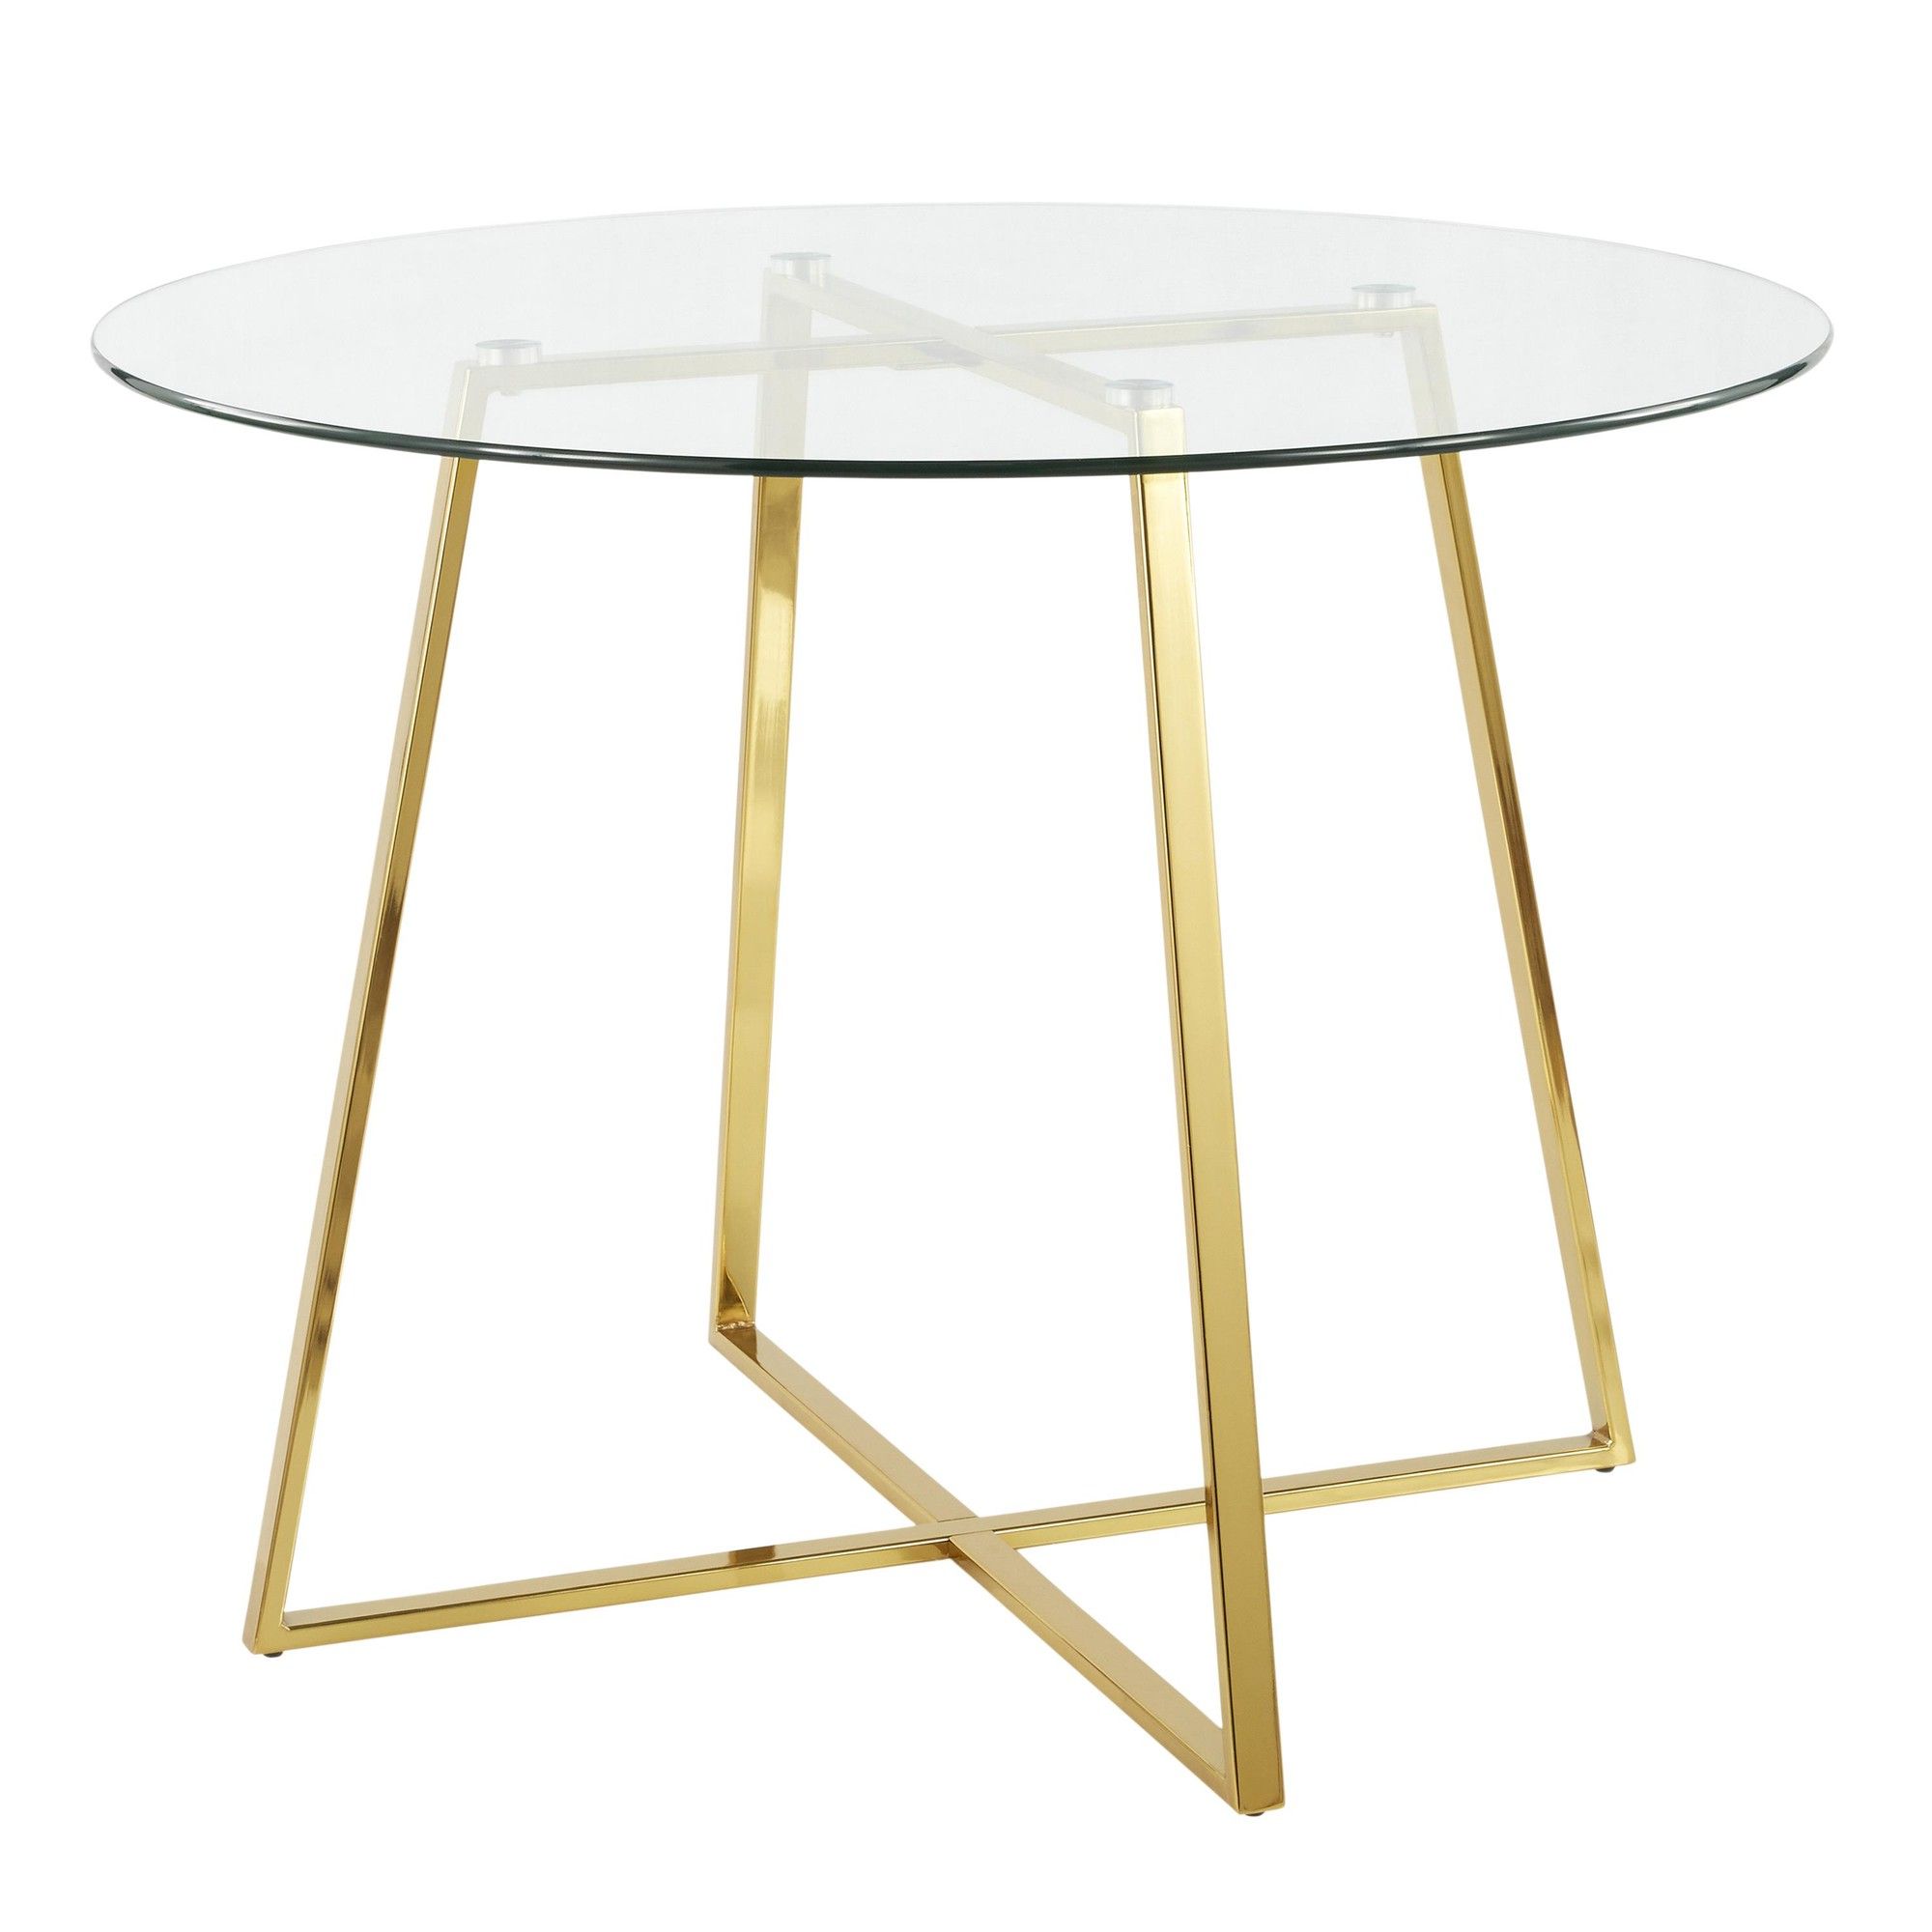 2019 Gold Dining Tables Throughout Cosmo Contemporary/Glam Dining Table In Gold Metal And (View 6 of 15)